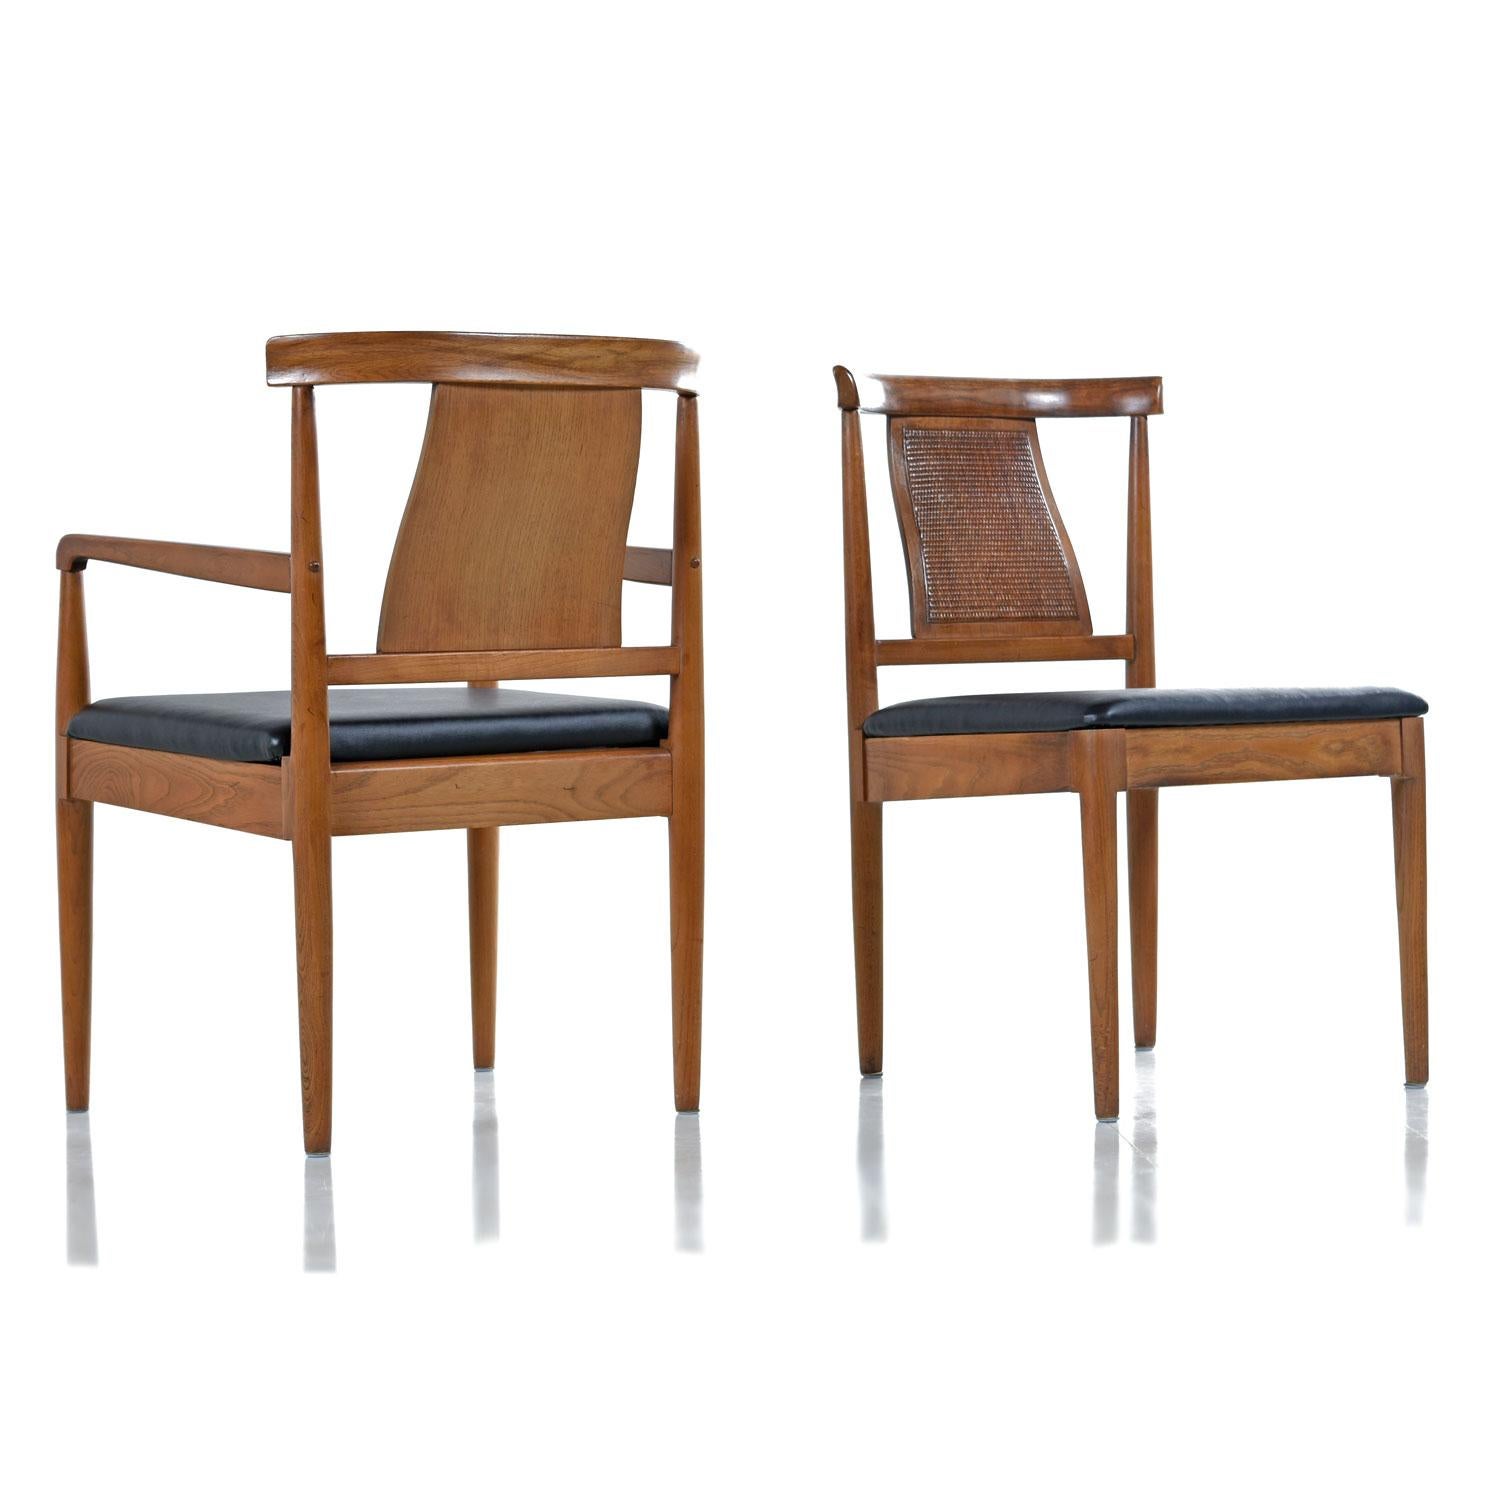 American of Martinsville is one of the most beloved makers of the Mid-Century Modern period in America. One look at these chairs and you can easily see why. American of Martinsville used only the finest selections of old growth wood to create their